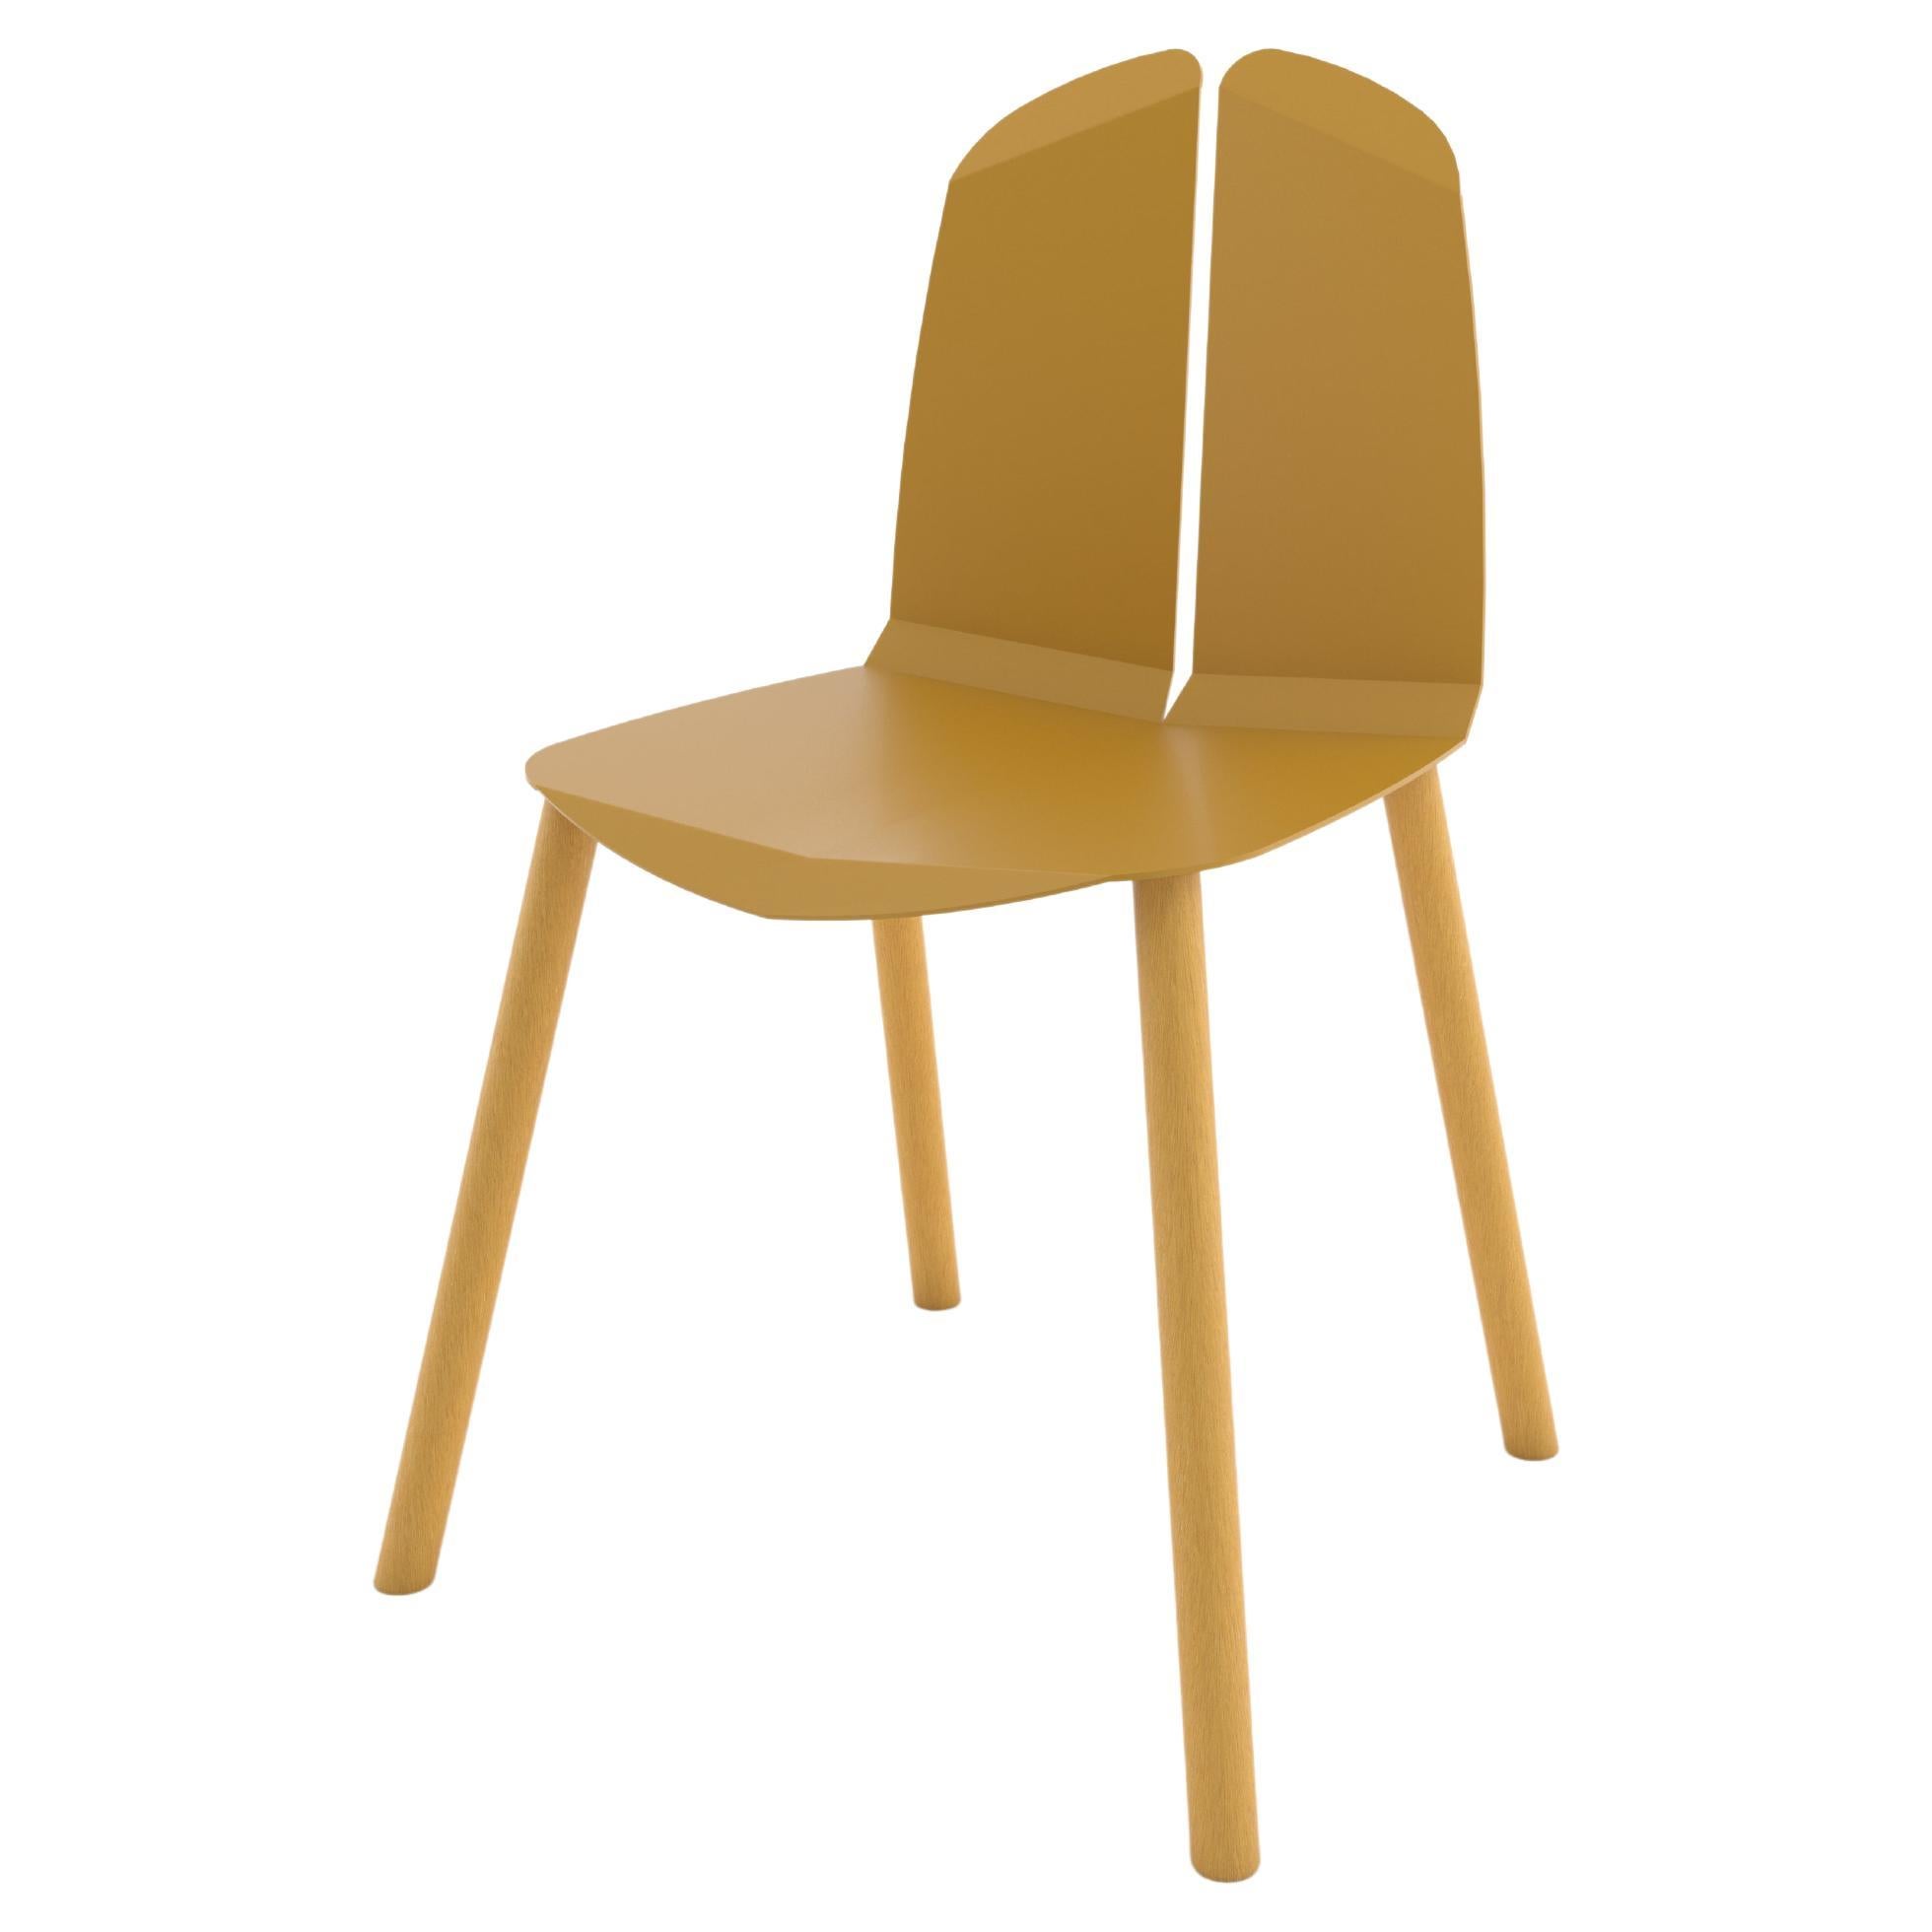 Noa Chair Mustard Yellow For Sale